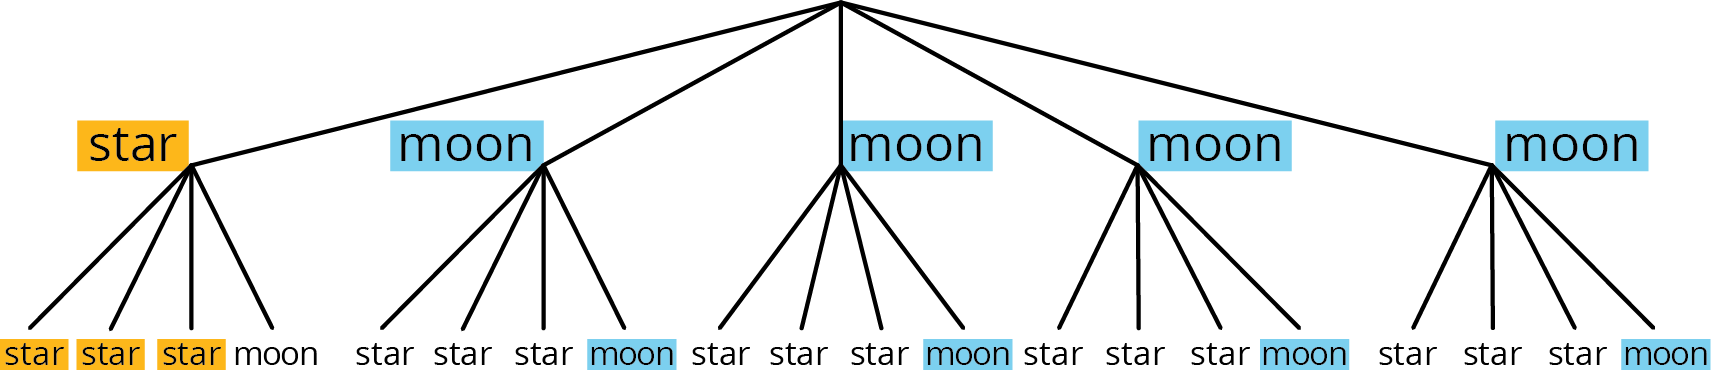 A tree diagram. The first choice has 5 branches, representing the 5 blocks in the bag: one branch is labeled “star,” the other 4 are labeled “moon.” Each of these branches has 4 branches, representing the 4 blocks in the second bag. 3 branches are labeled “star” and one is labeled “moon.” The word “star” in the first choice, and the 3 “star” choices branching from it are highlighted gold. From the first choice, the word “moon” is highlighted blue on each of the four remaining branches. From each of those branches, the one choice of “moon” for each is also highlighted blue.